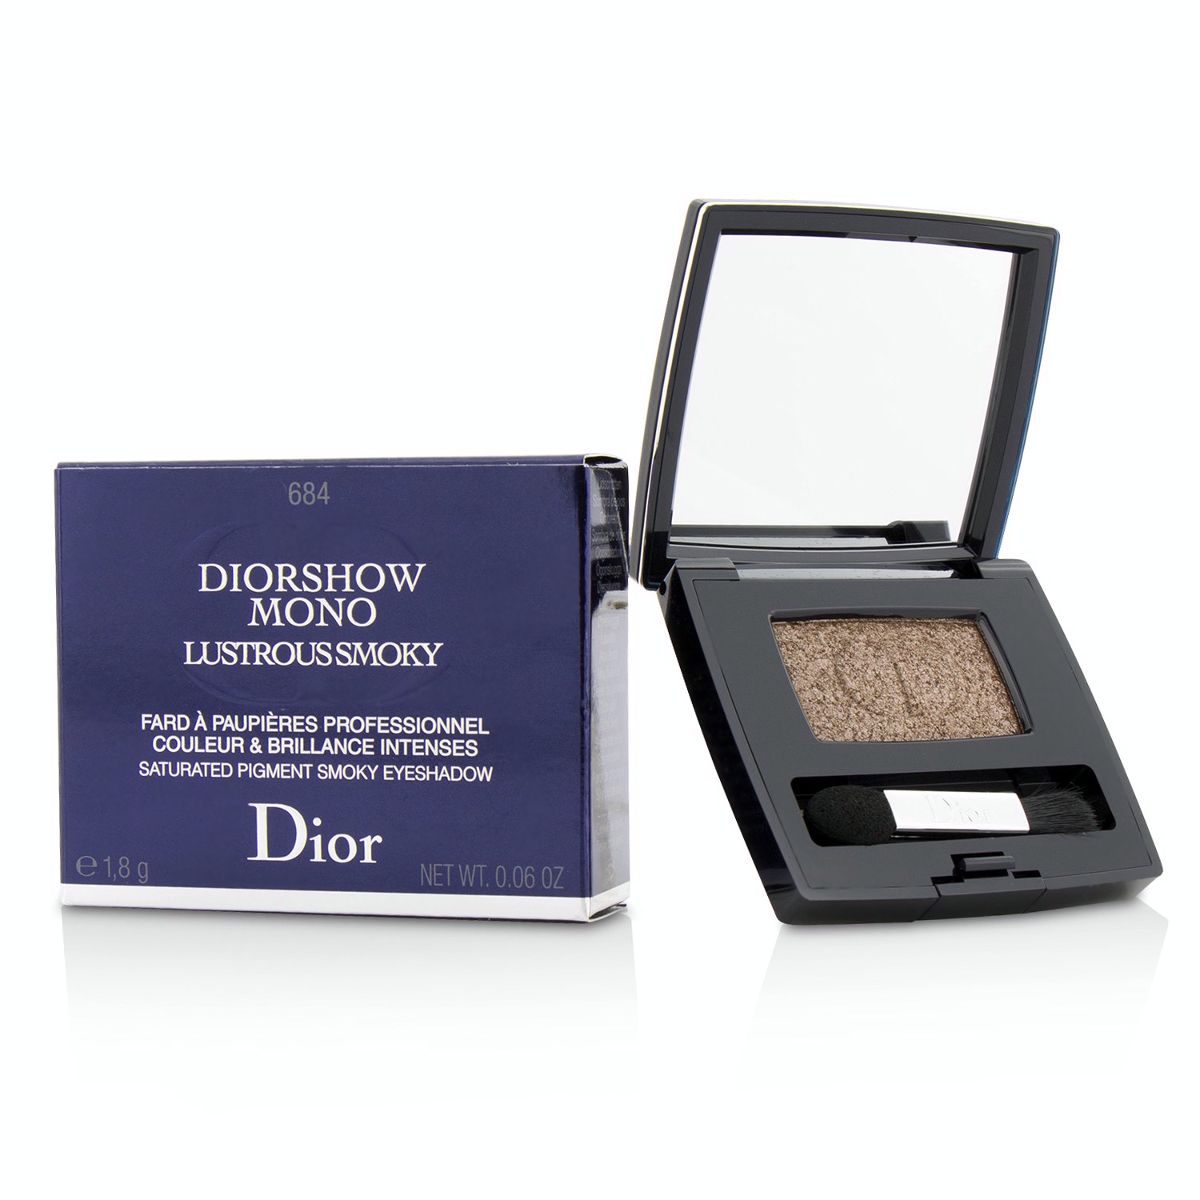 Diorshow Mono Lustrous Smoky Saturated Pigment Smoky Eyeshadow - # 684 Reflection Christian Dior Image